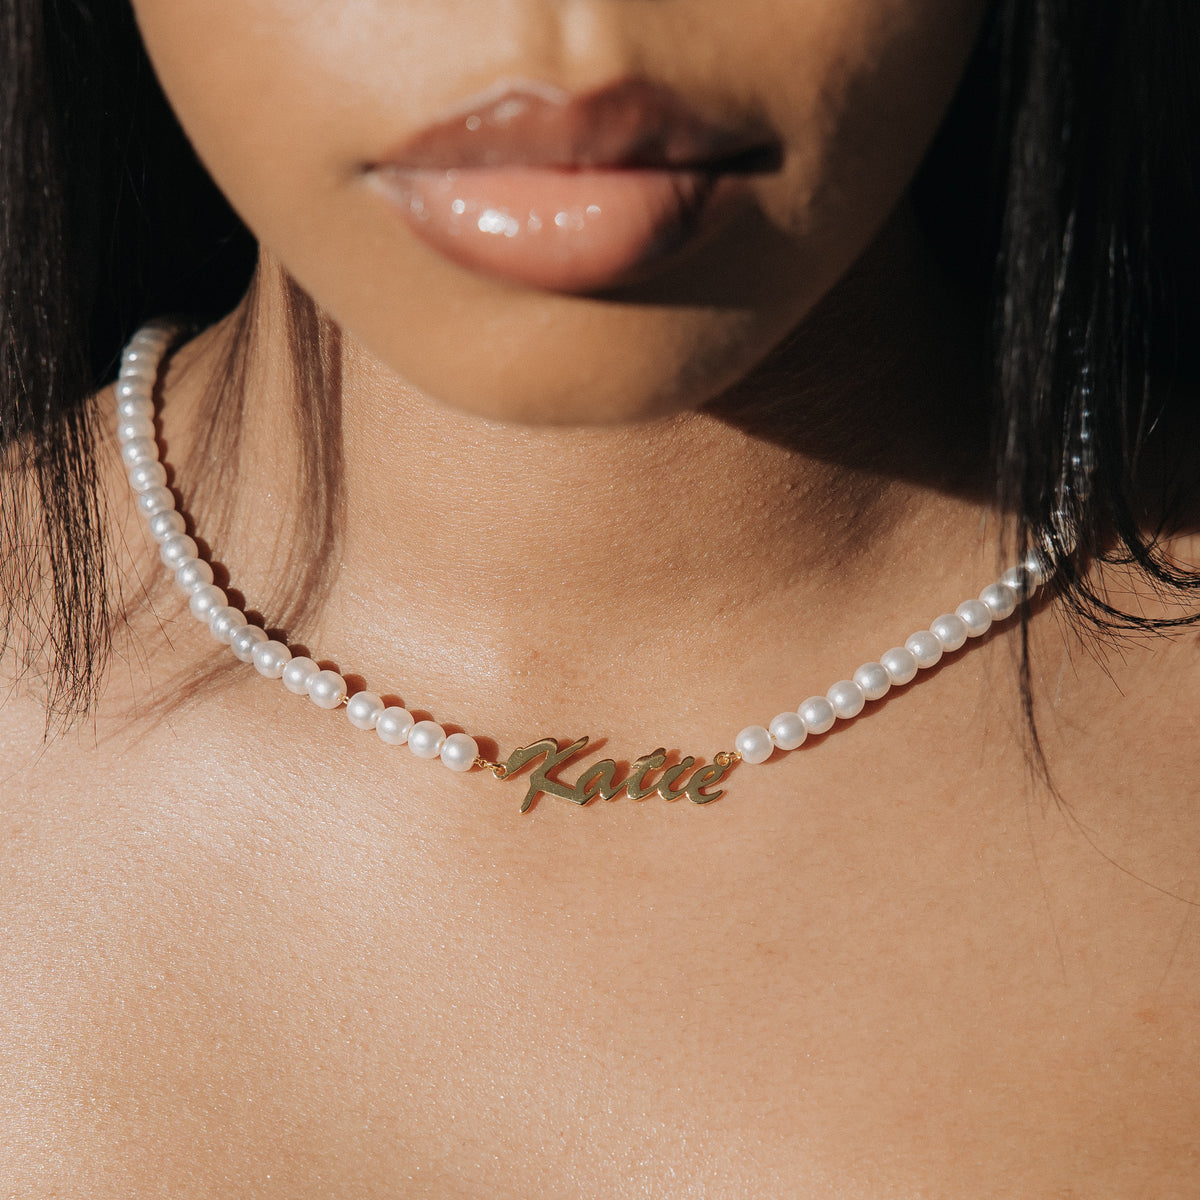 The Pearl Custom Nameplate Necklace